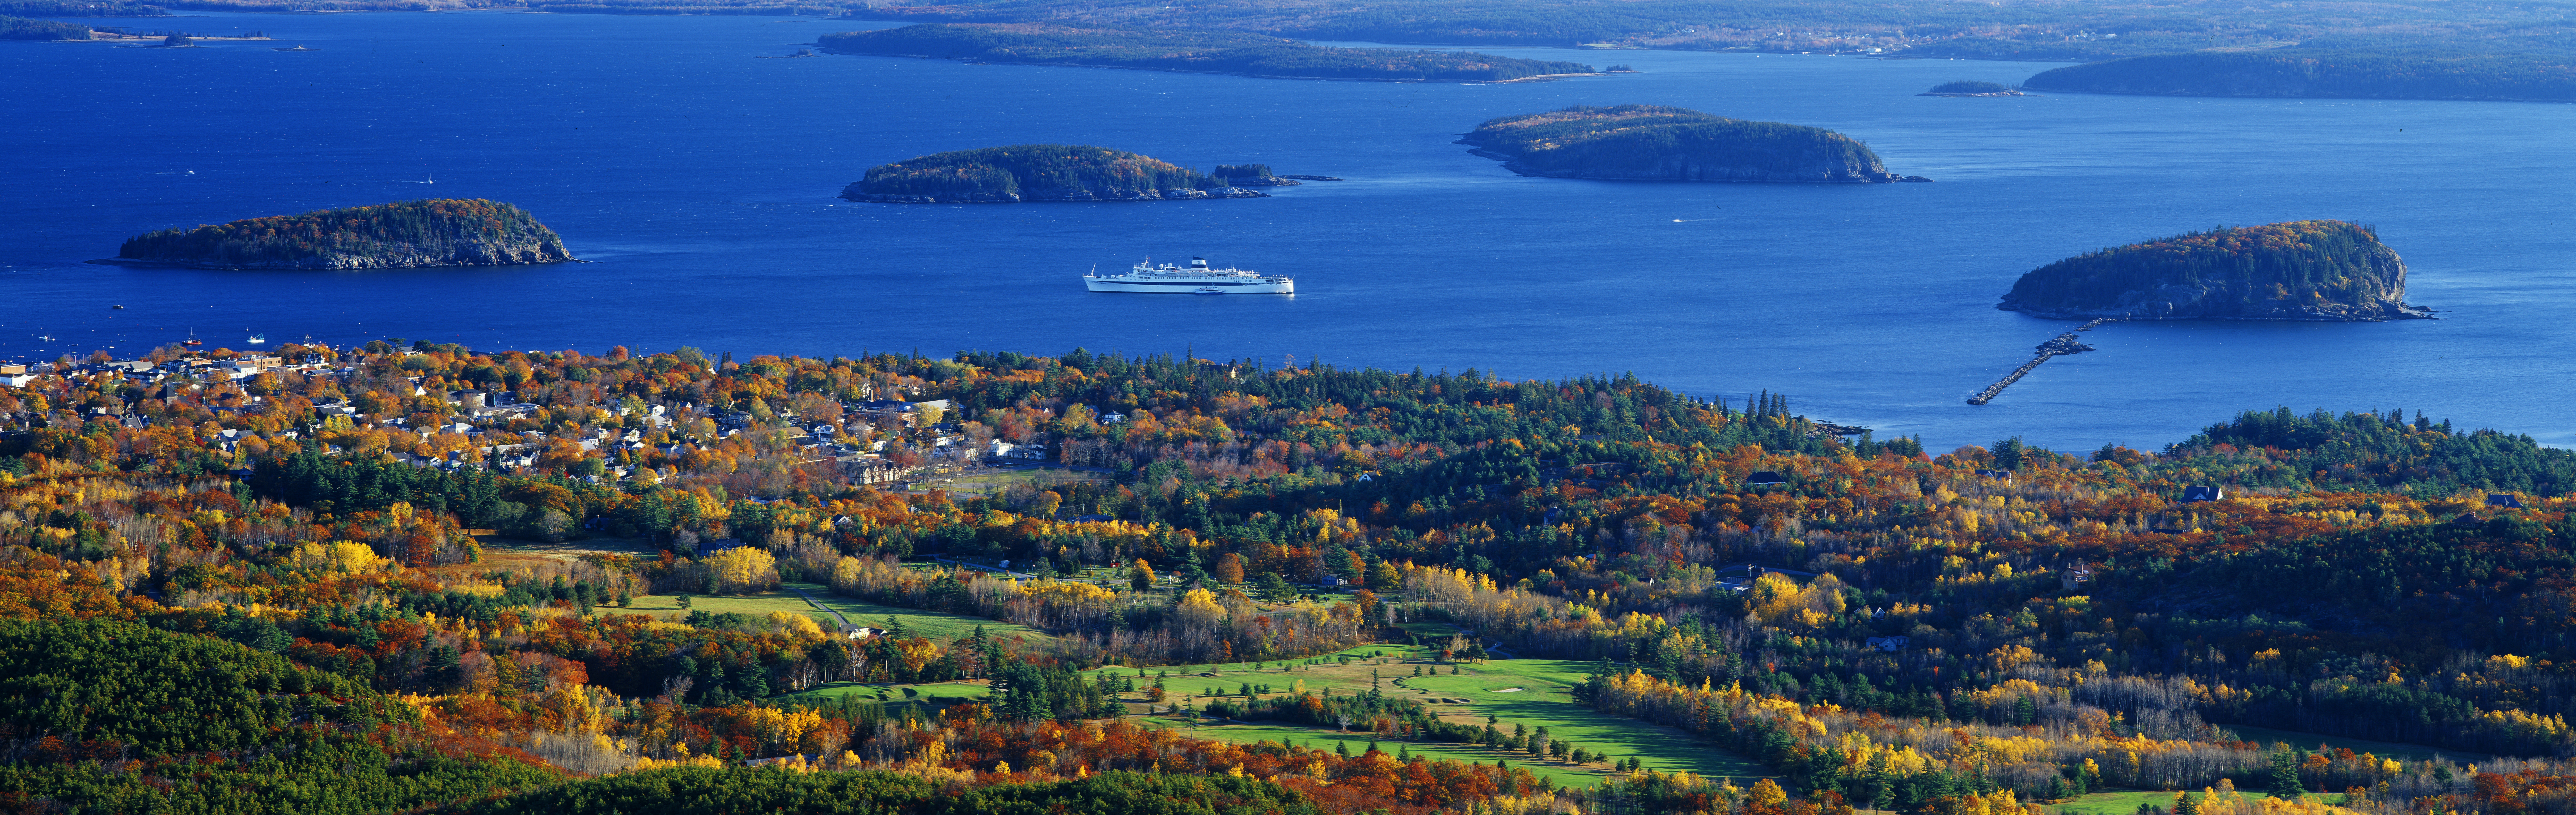 7-night Thanksgiving cruises from $379